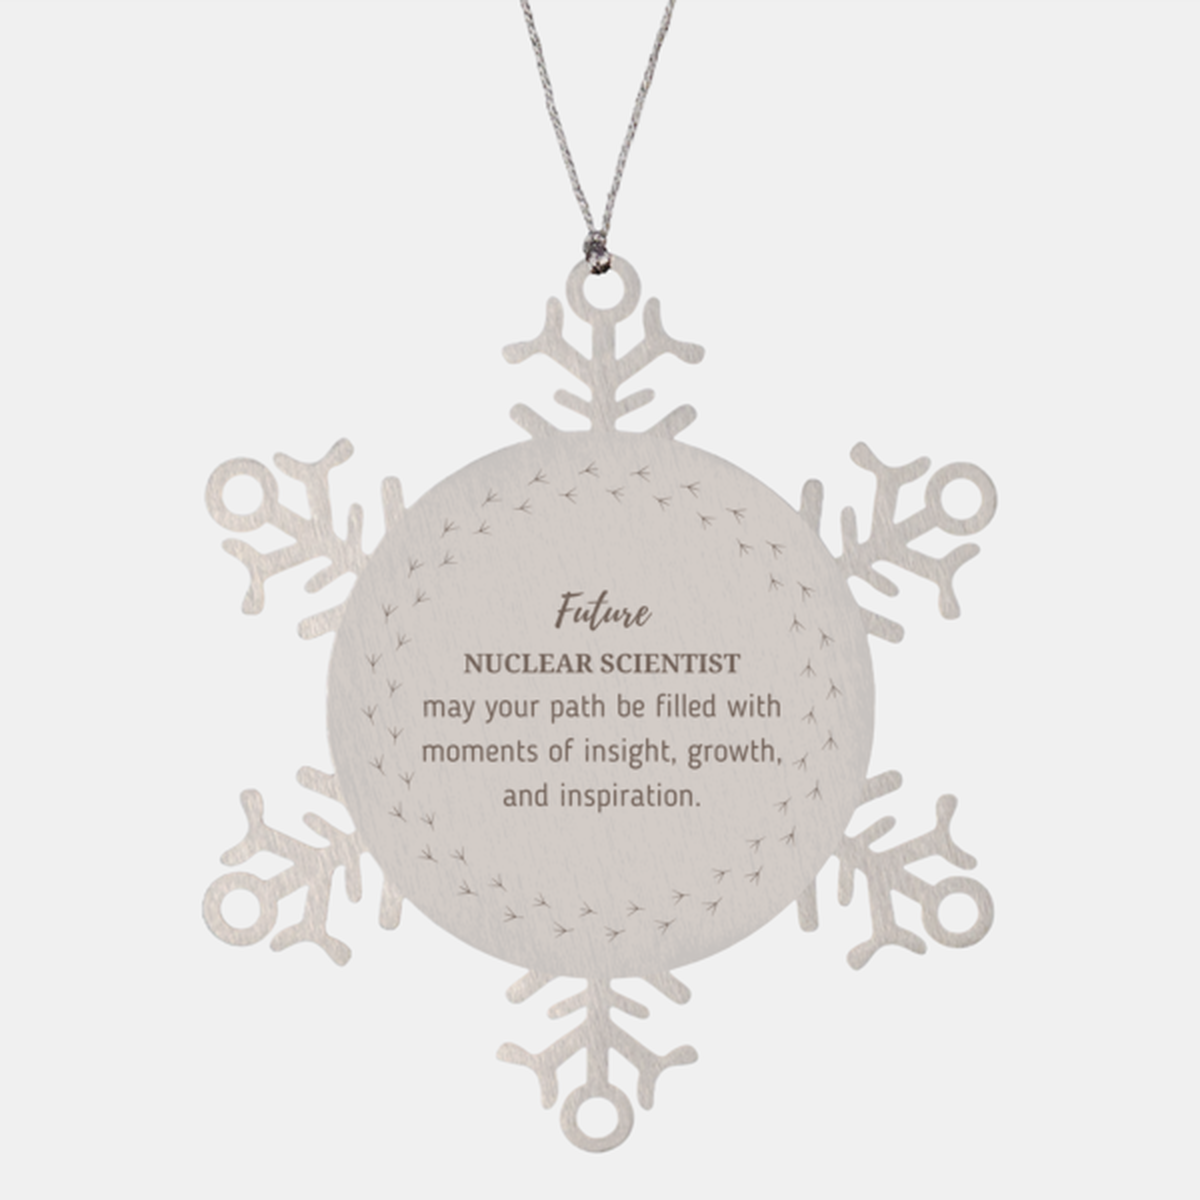 Future Nuclear Scientist Gifts, May your path be filled with moments of insight, Graduation Gifts for New Nuclear Scientist, Christmas Unique Snowflake Ornament For Men, Women, Friends